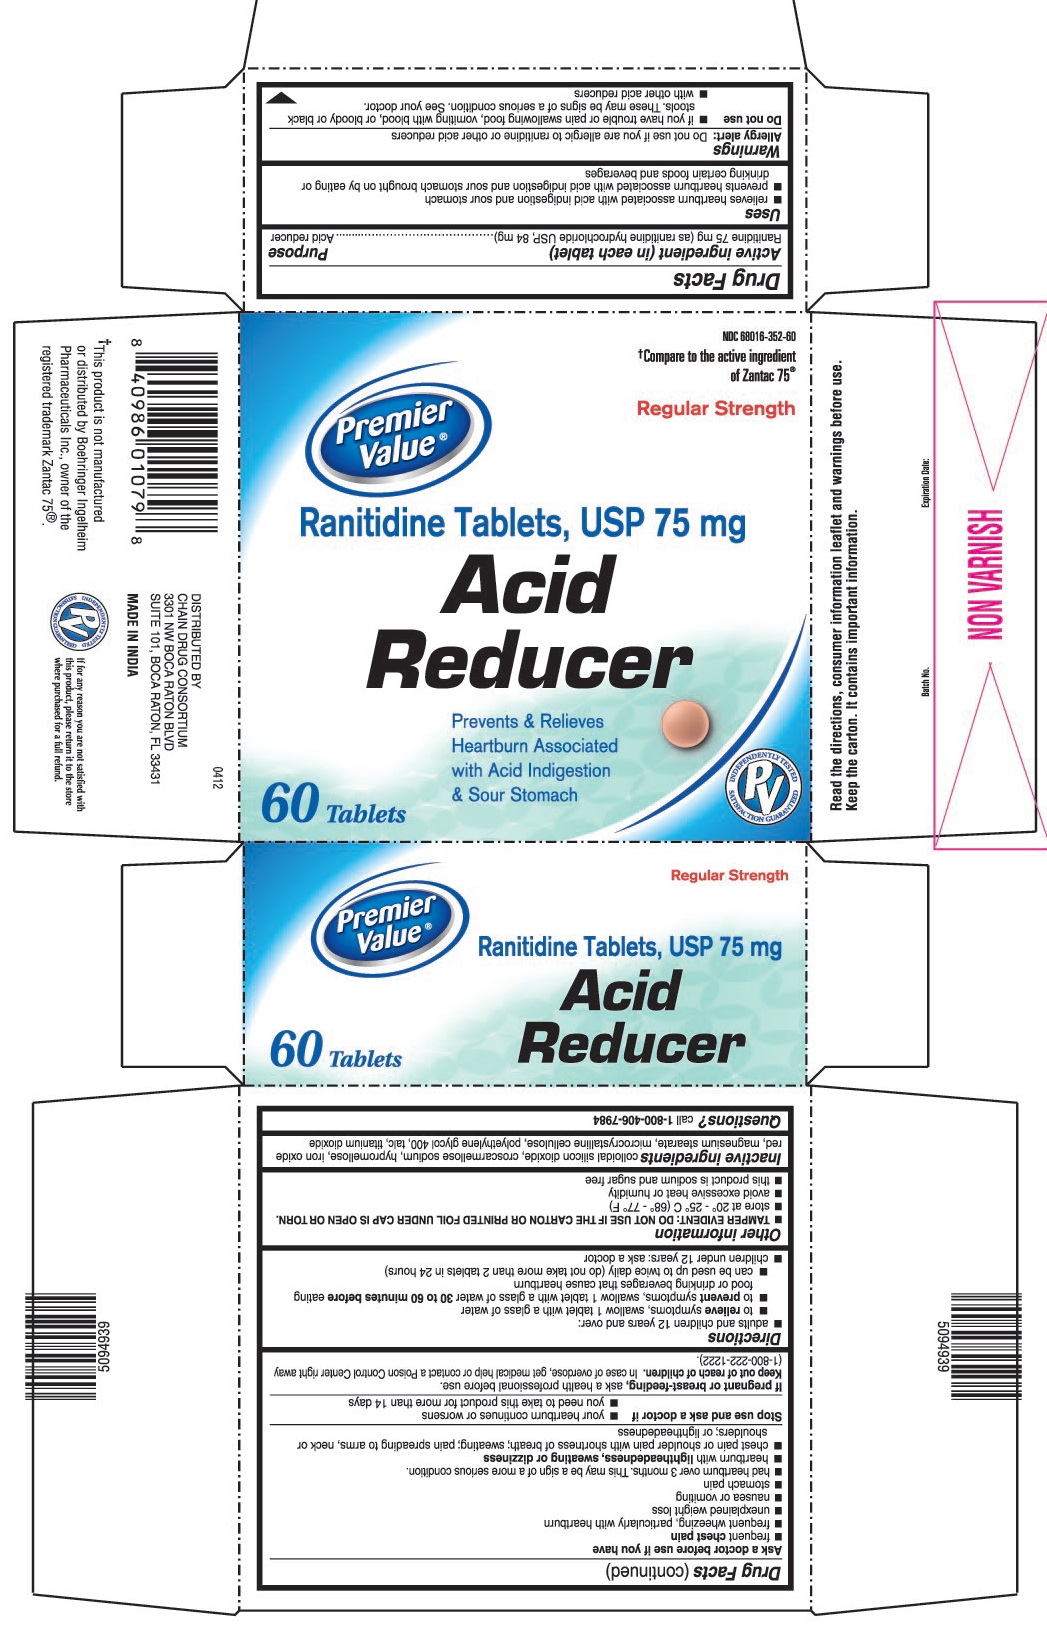 This is the 60 count bottle carton label for Premier Value Ranitidine tablets, USP 75 mg.